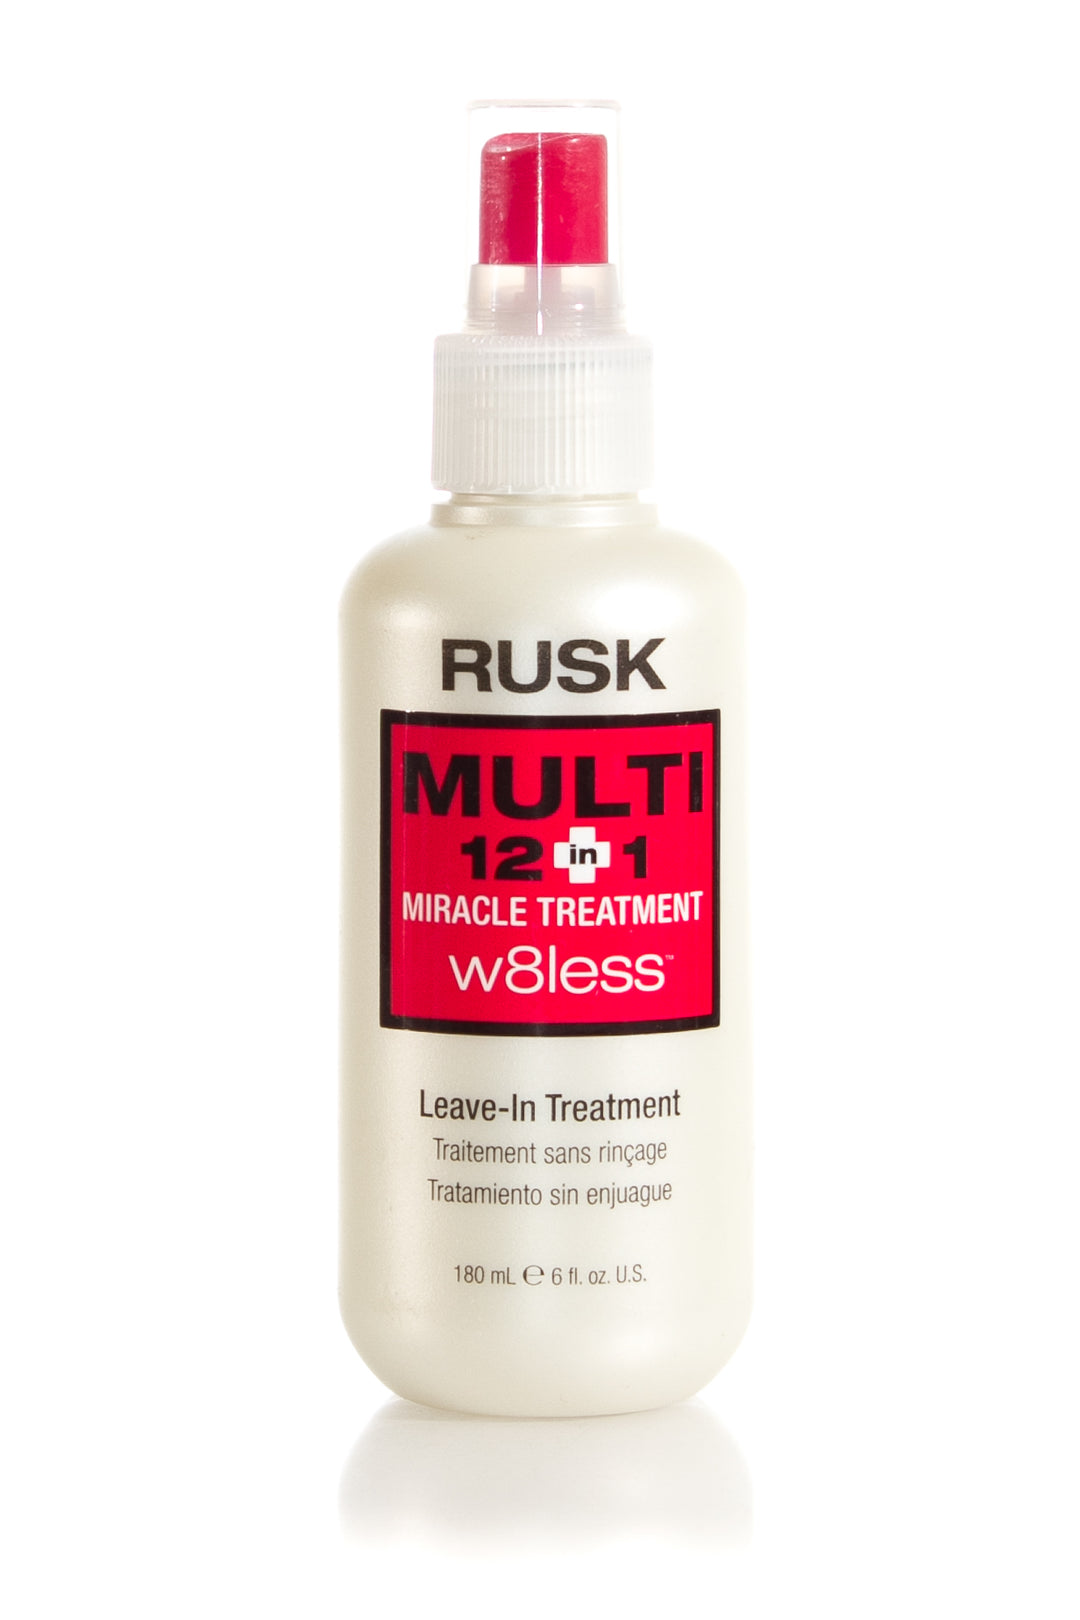 RUSK Multi 2 in 1 W8less Miracle Treatment | 180ml